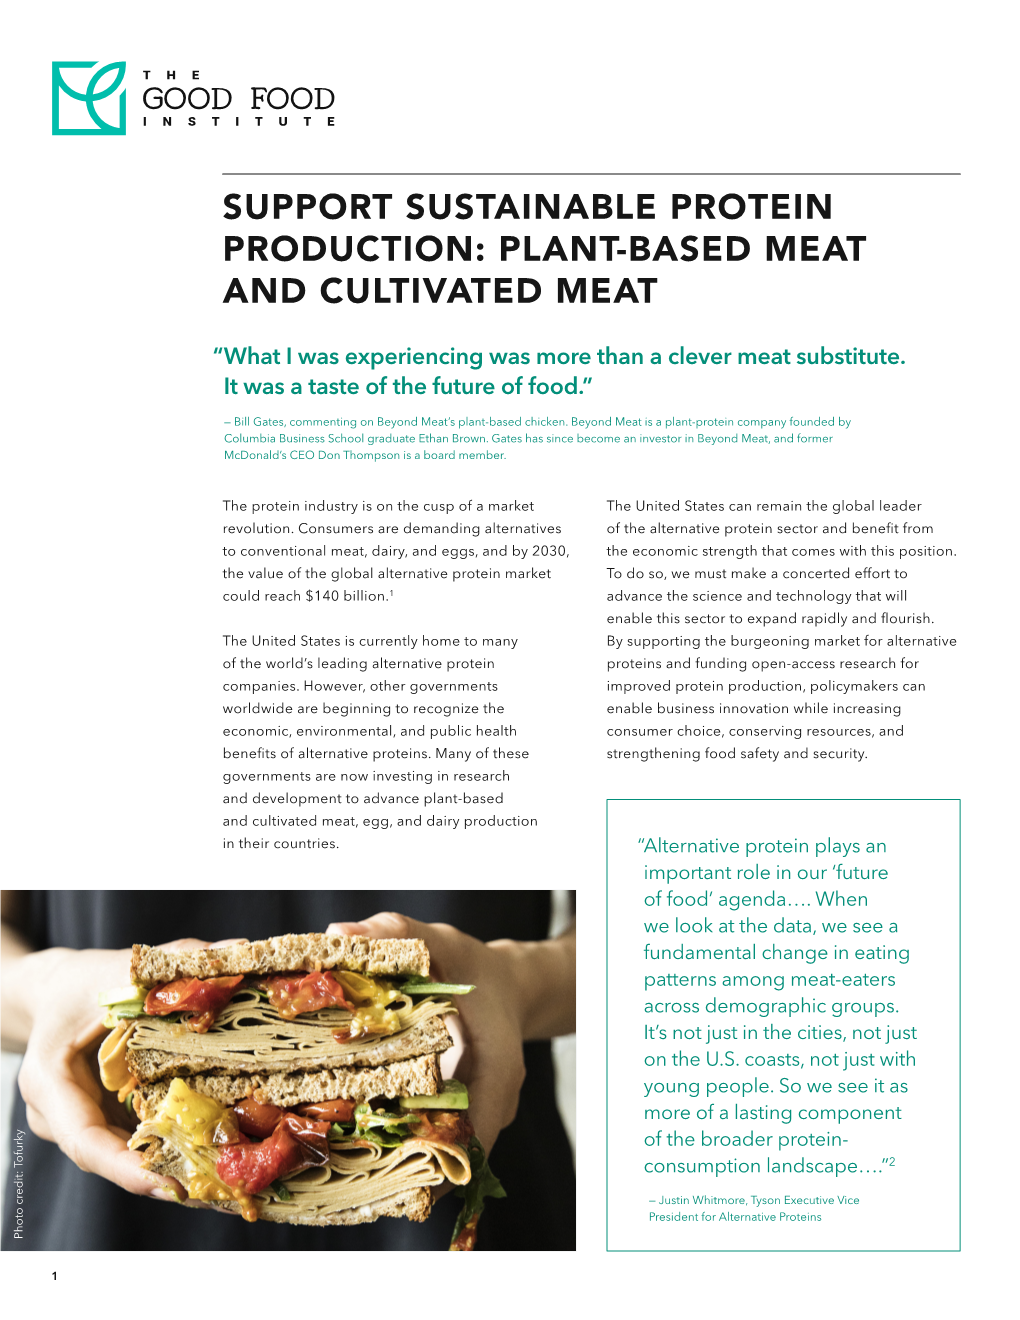 Support Sustainable Protein Production: Plant-Based Meat and Cultivated Meat